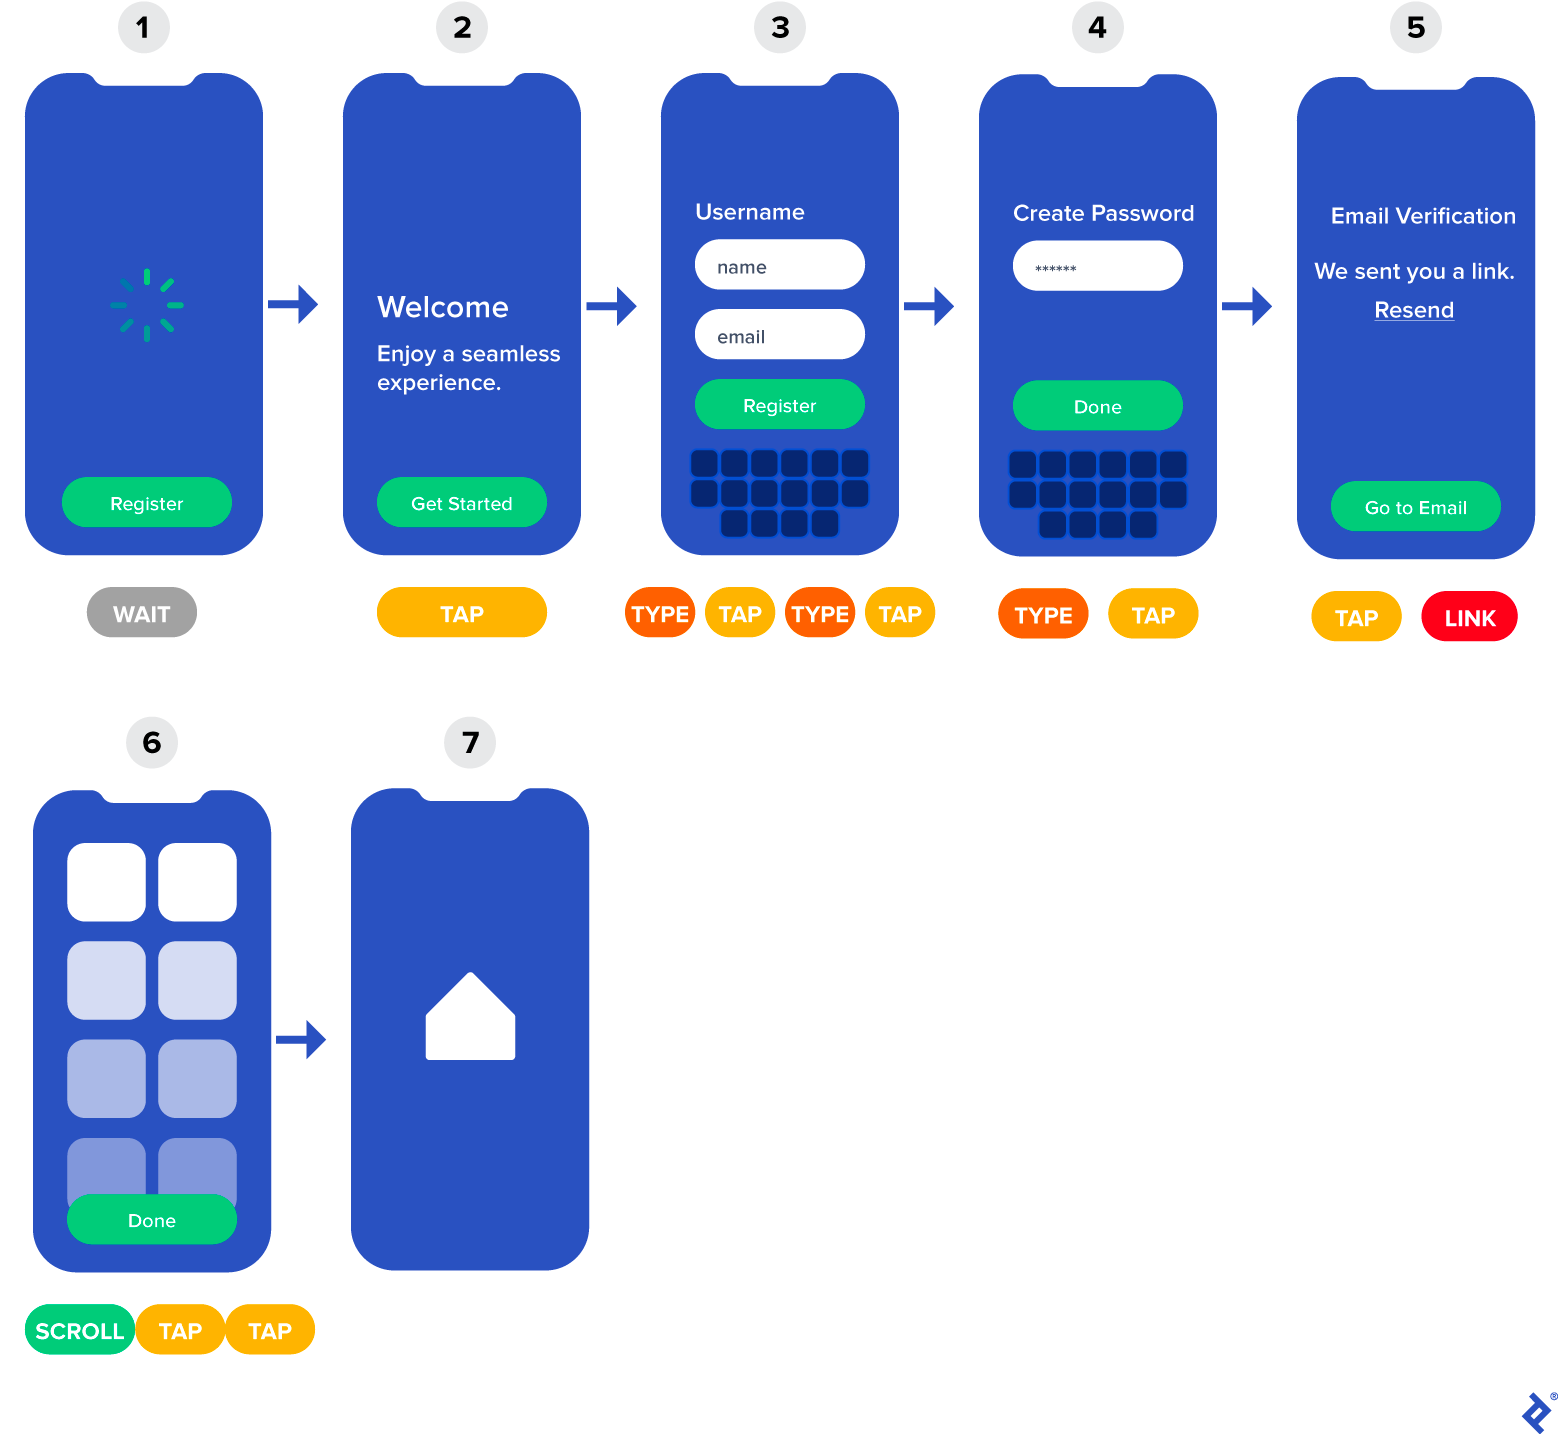 The onboarding user flow for the app is condensed into seven screens. Below each screen are action labels involved in the step: wait, scroll, tap, type, or link. The welcome screen includes one of the appâs benefits (âenjoy a seamless experienceâ) and the username and email address fields have been combined into one screen.